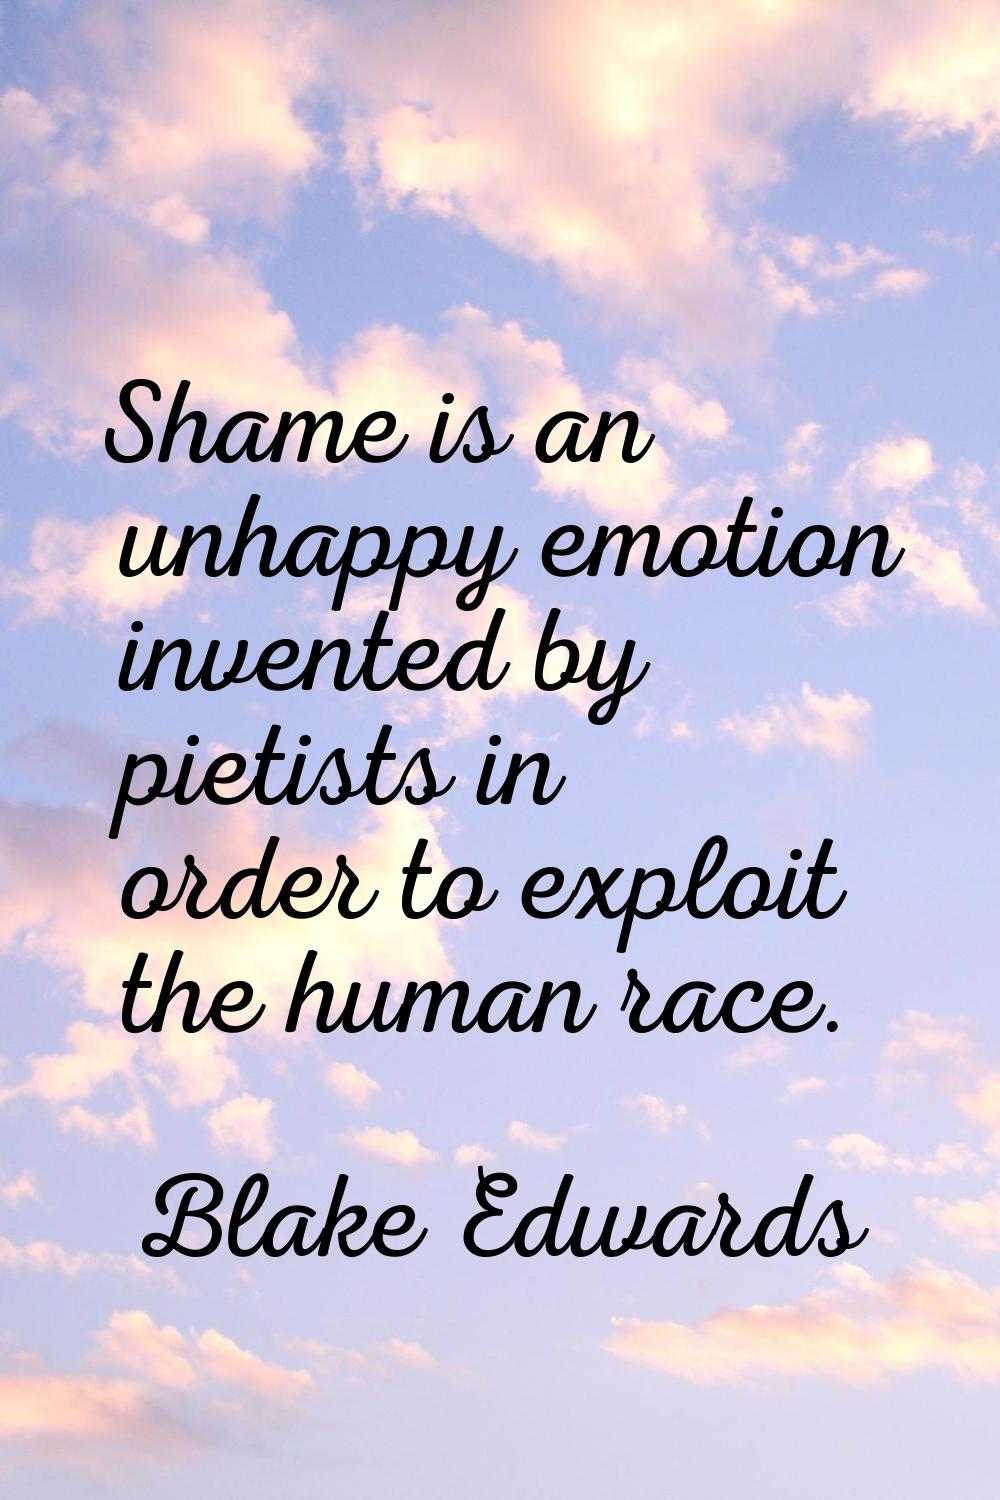 Shame is an unhappy emotion invented by pietists in order to exploit the human race.